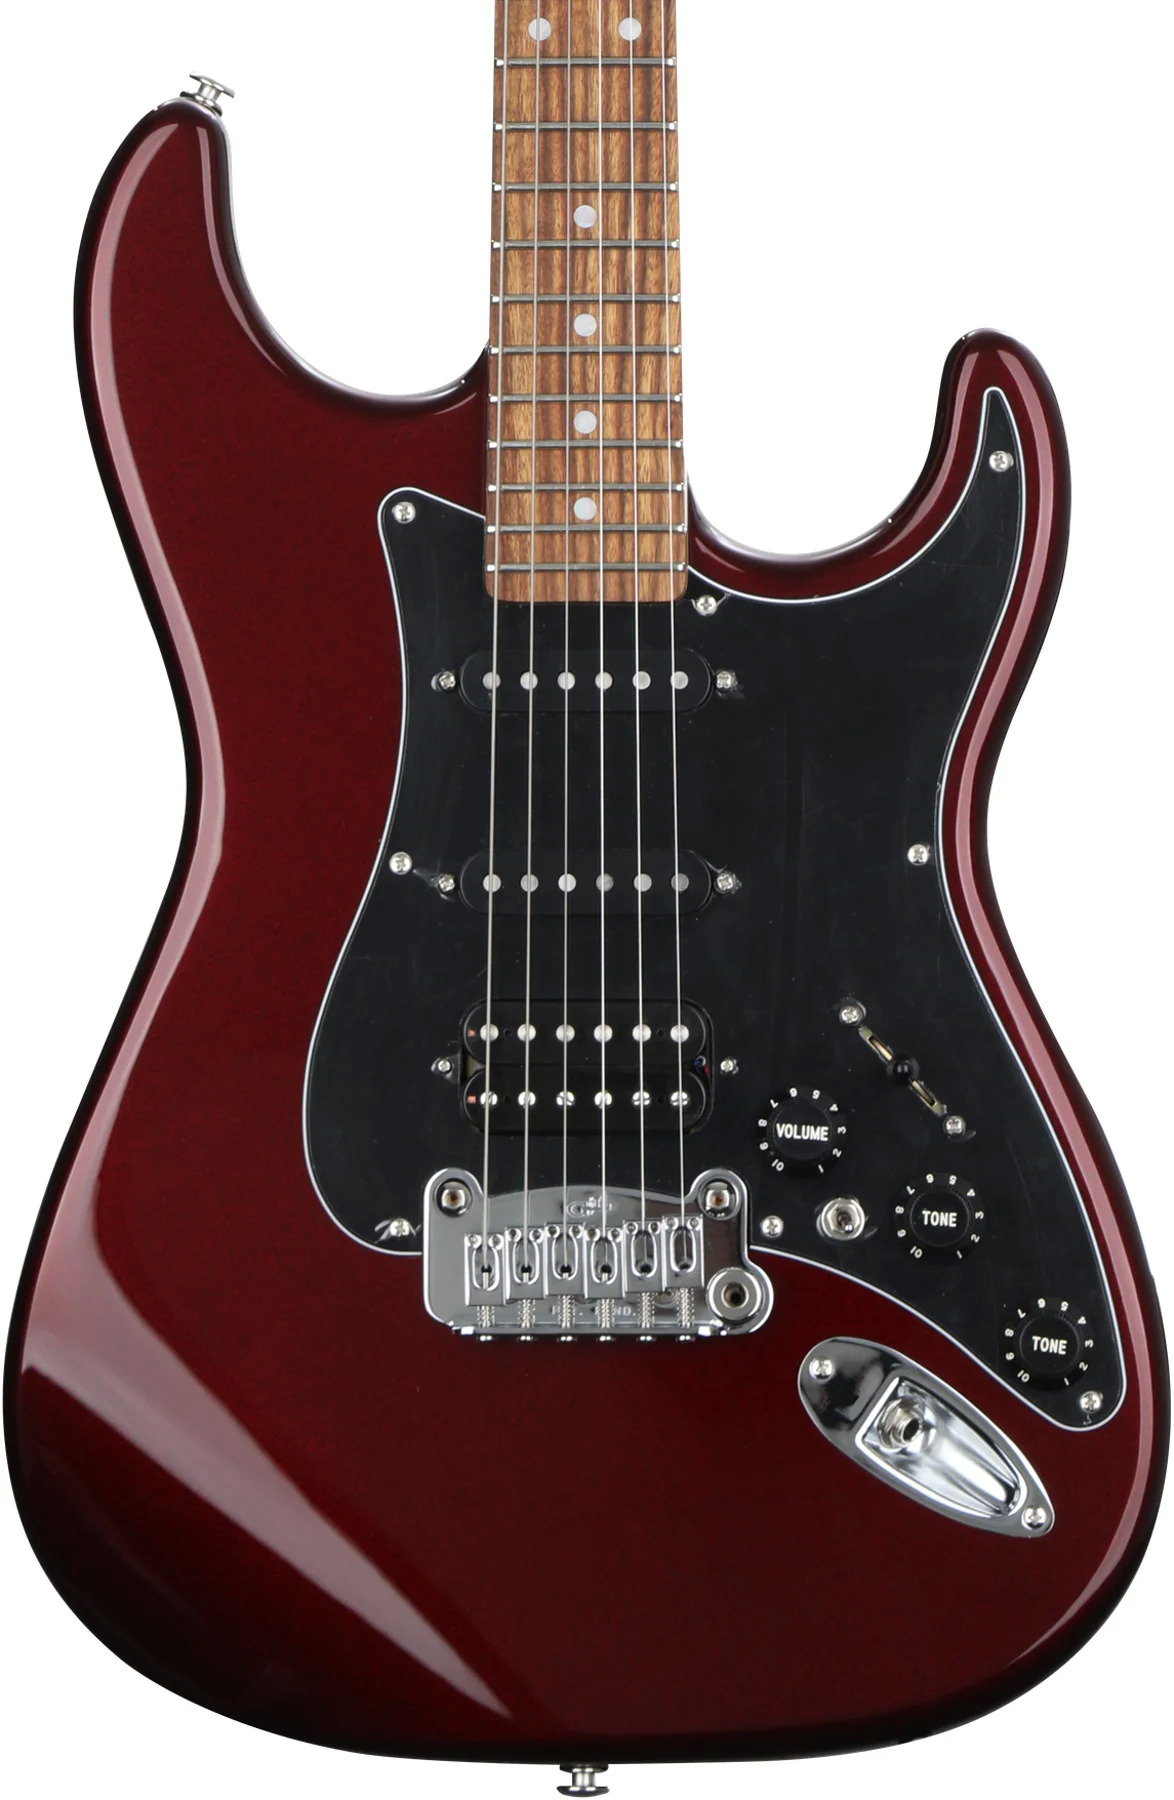 G&L Fullerton Deluxe Legacy HB Electric Guitar (Ruby Red Metallic, Dent 'n' Scratch) $1225